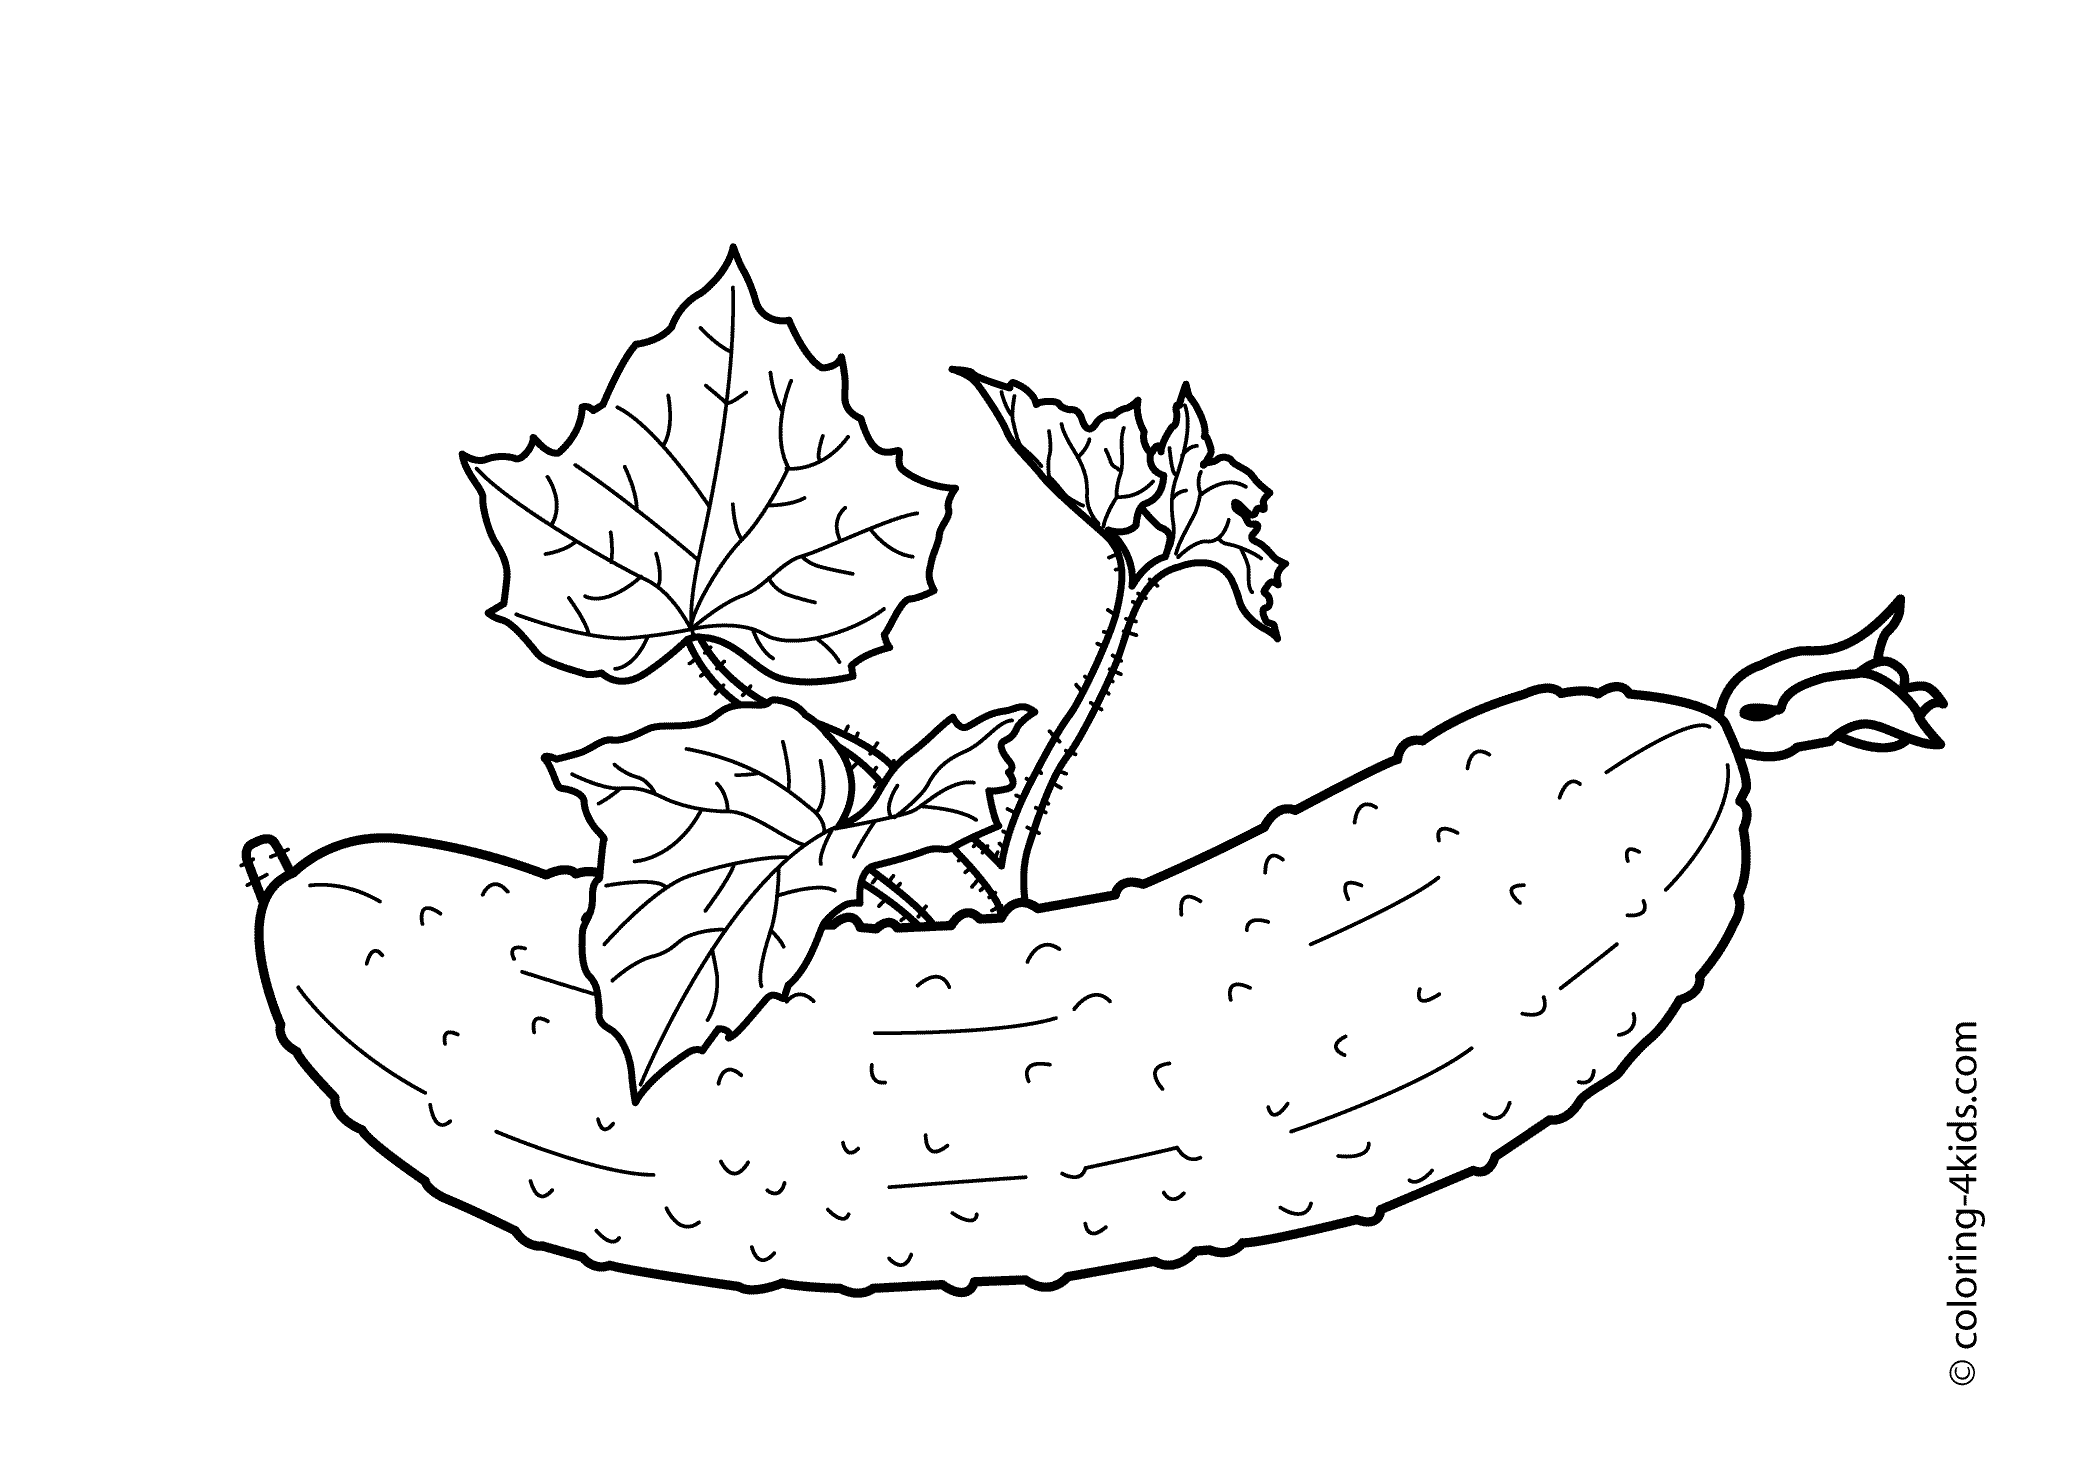 Cucumber with leaves vegetables coloring pages for kids, printable free |  Vegetable coloring pages, Coloring pages, Coloring pages for kids